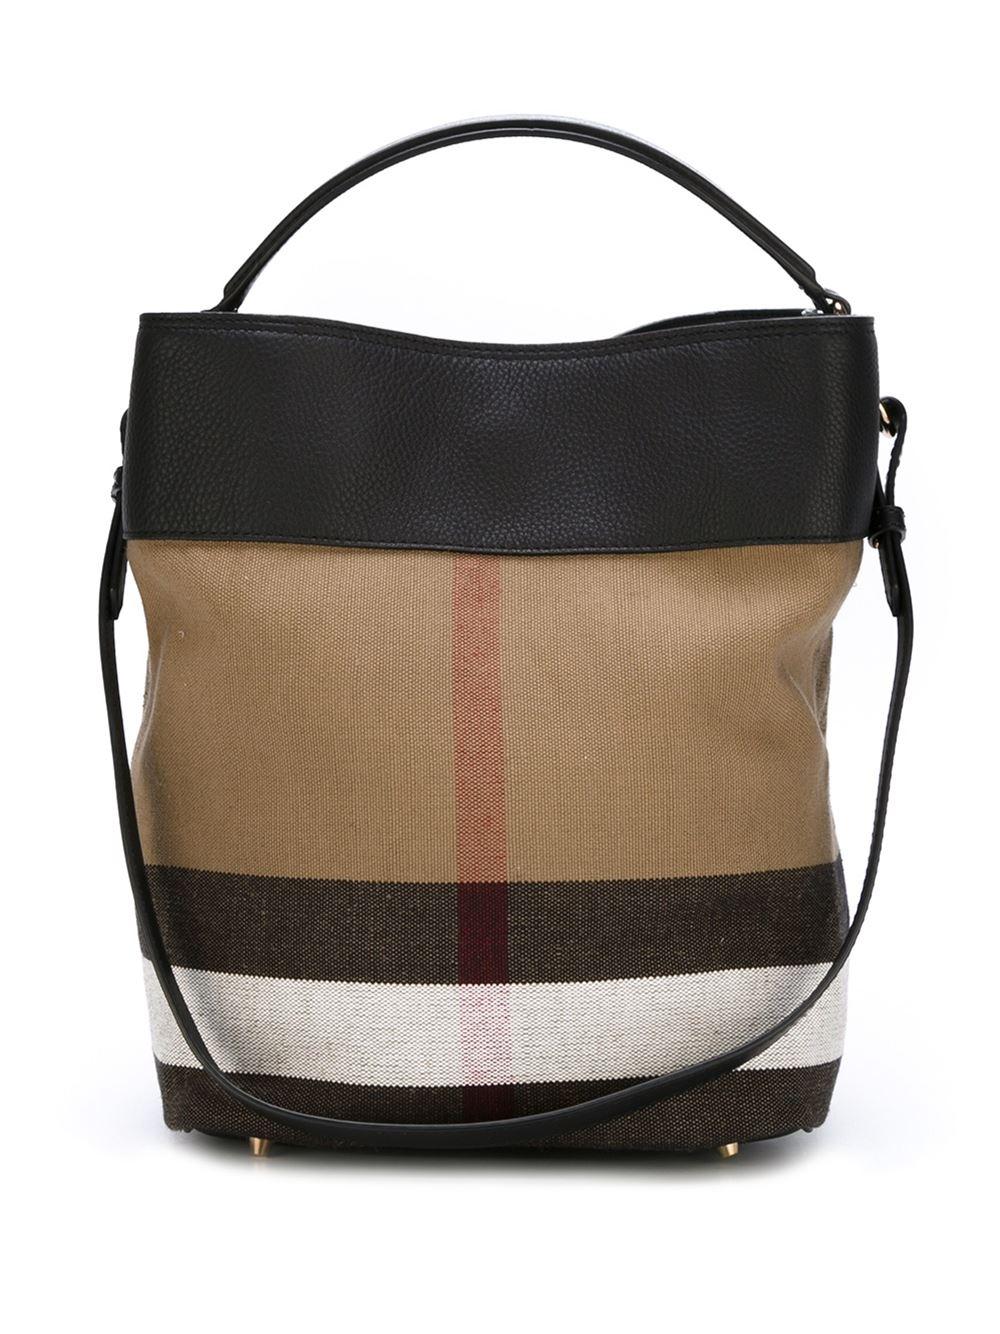 Burberry Large Striped Bucket Bag in Black - Lyst